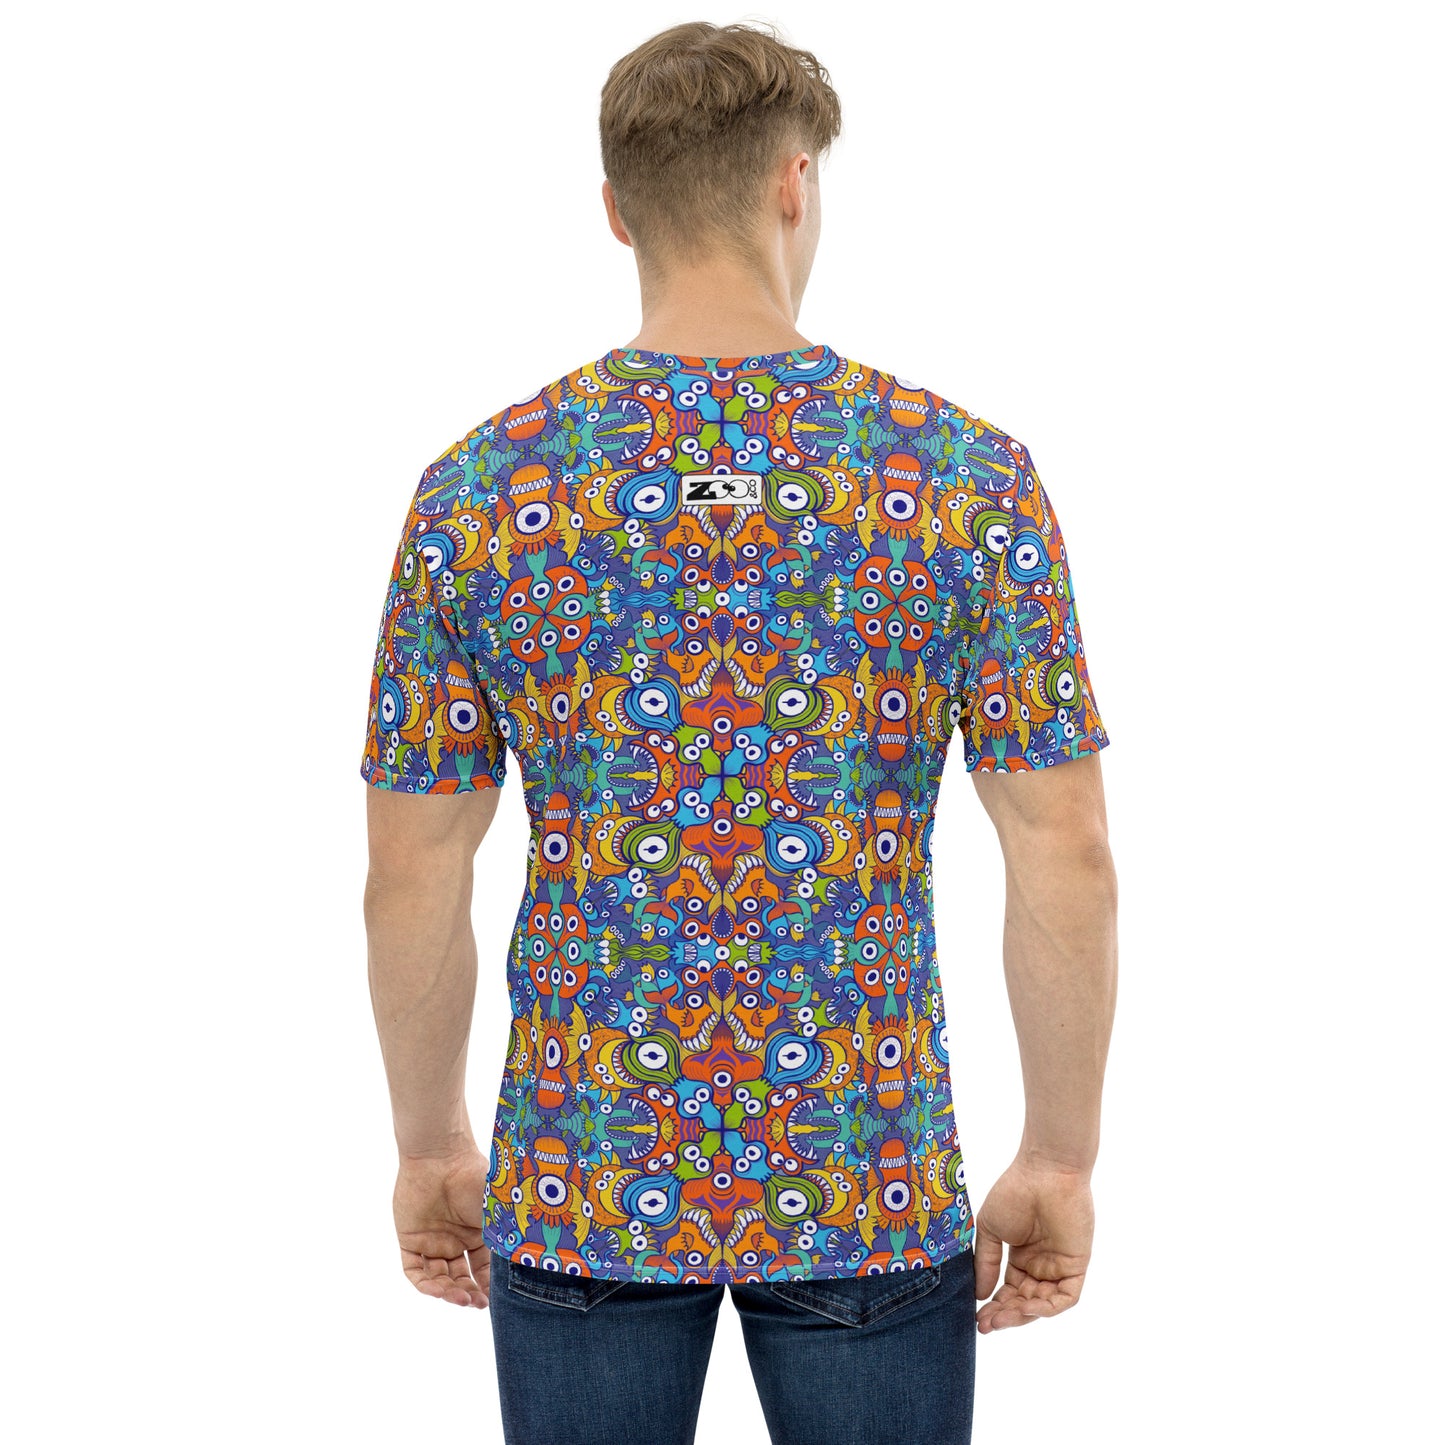 Kaleidoscope of Whimsy: A Vivid Dream in Design - Men's t-shirt. Back view